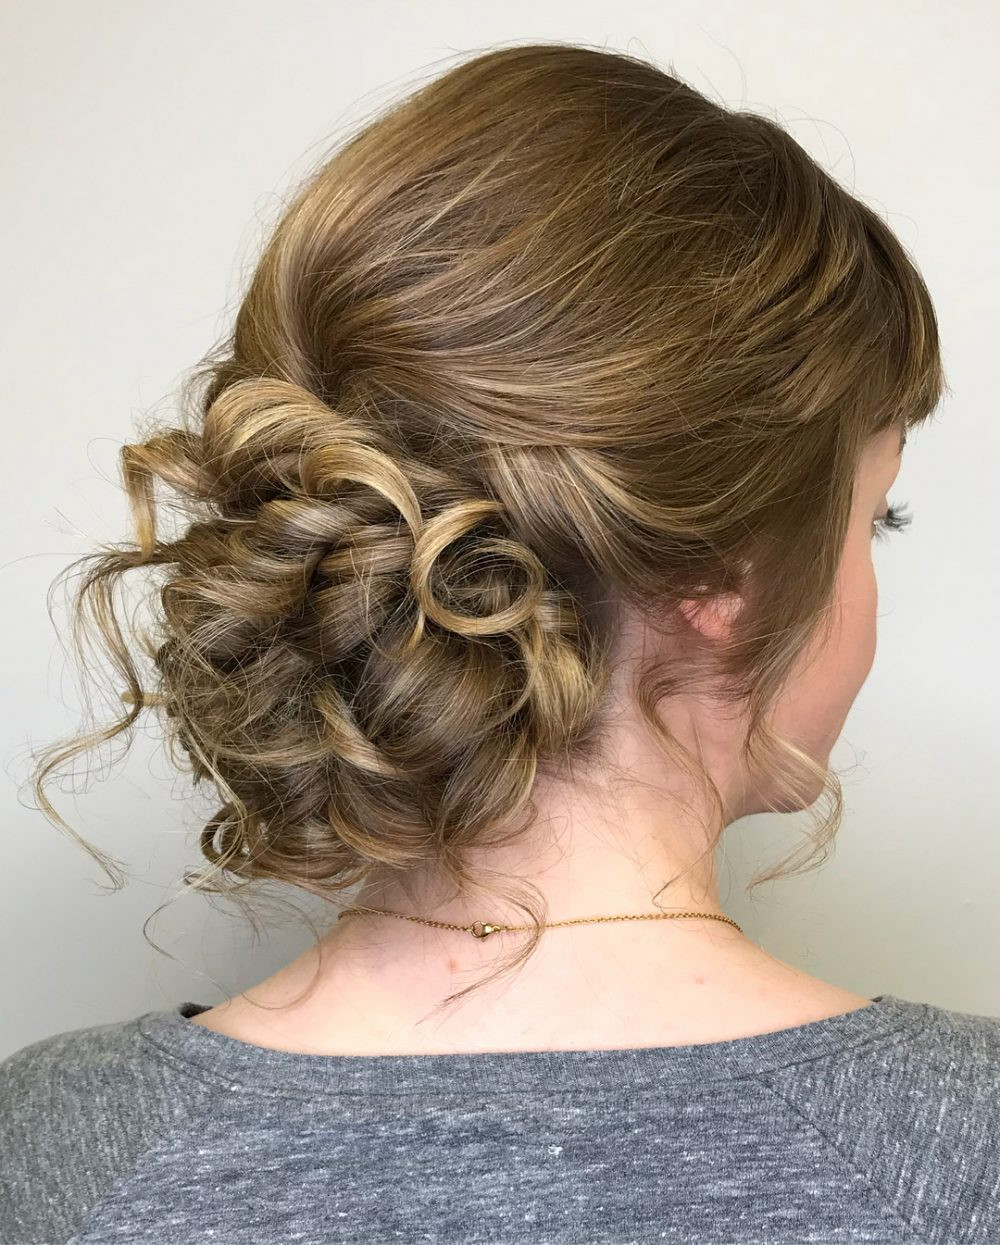 Cute Formal Hairstyles
 23 Cute Prom Hairstyles for 2020 Updos Braids Half Ups